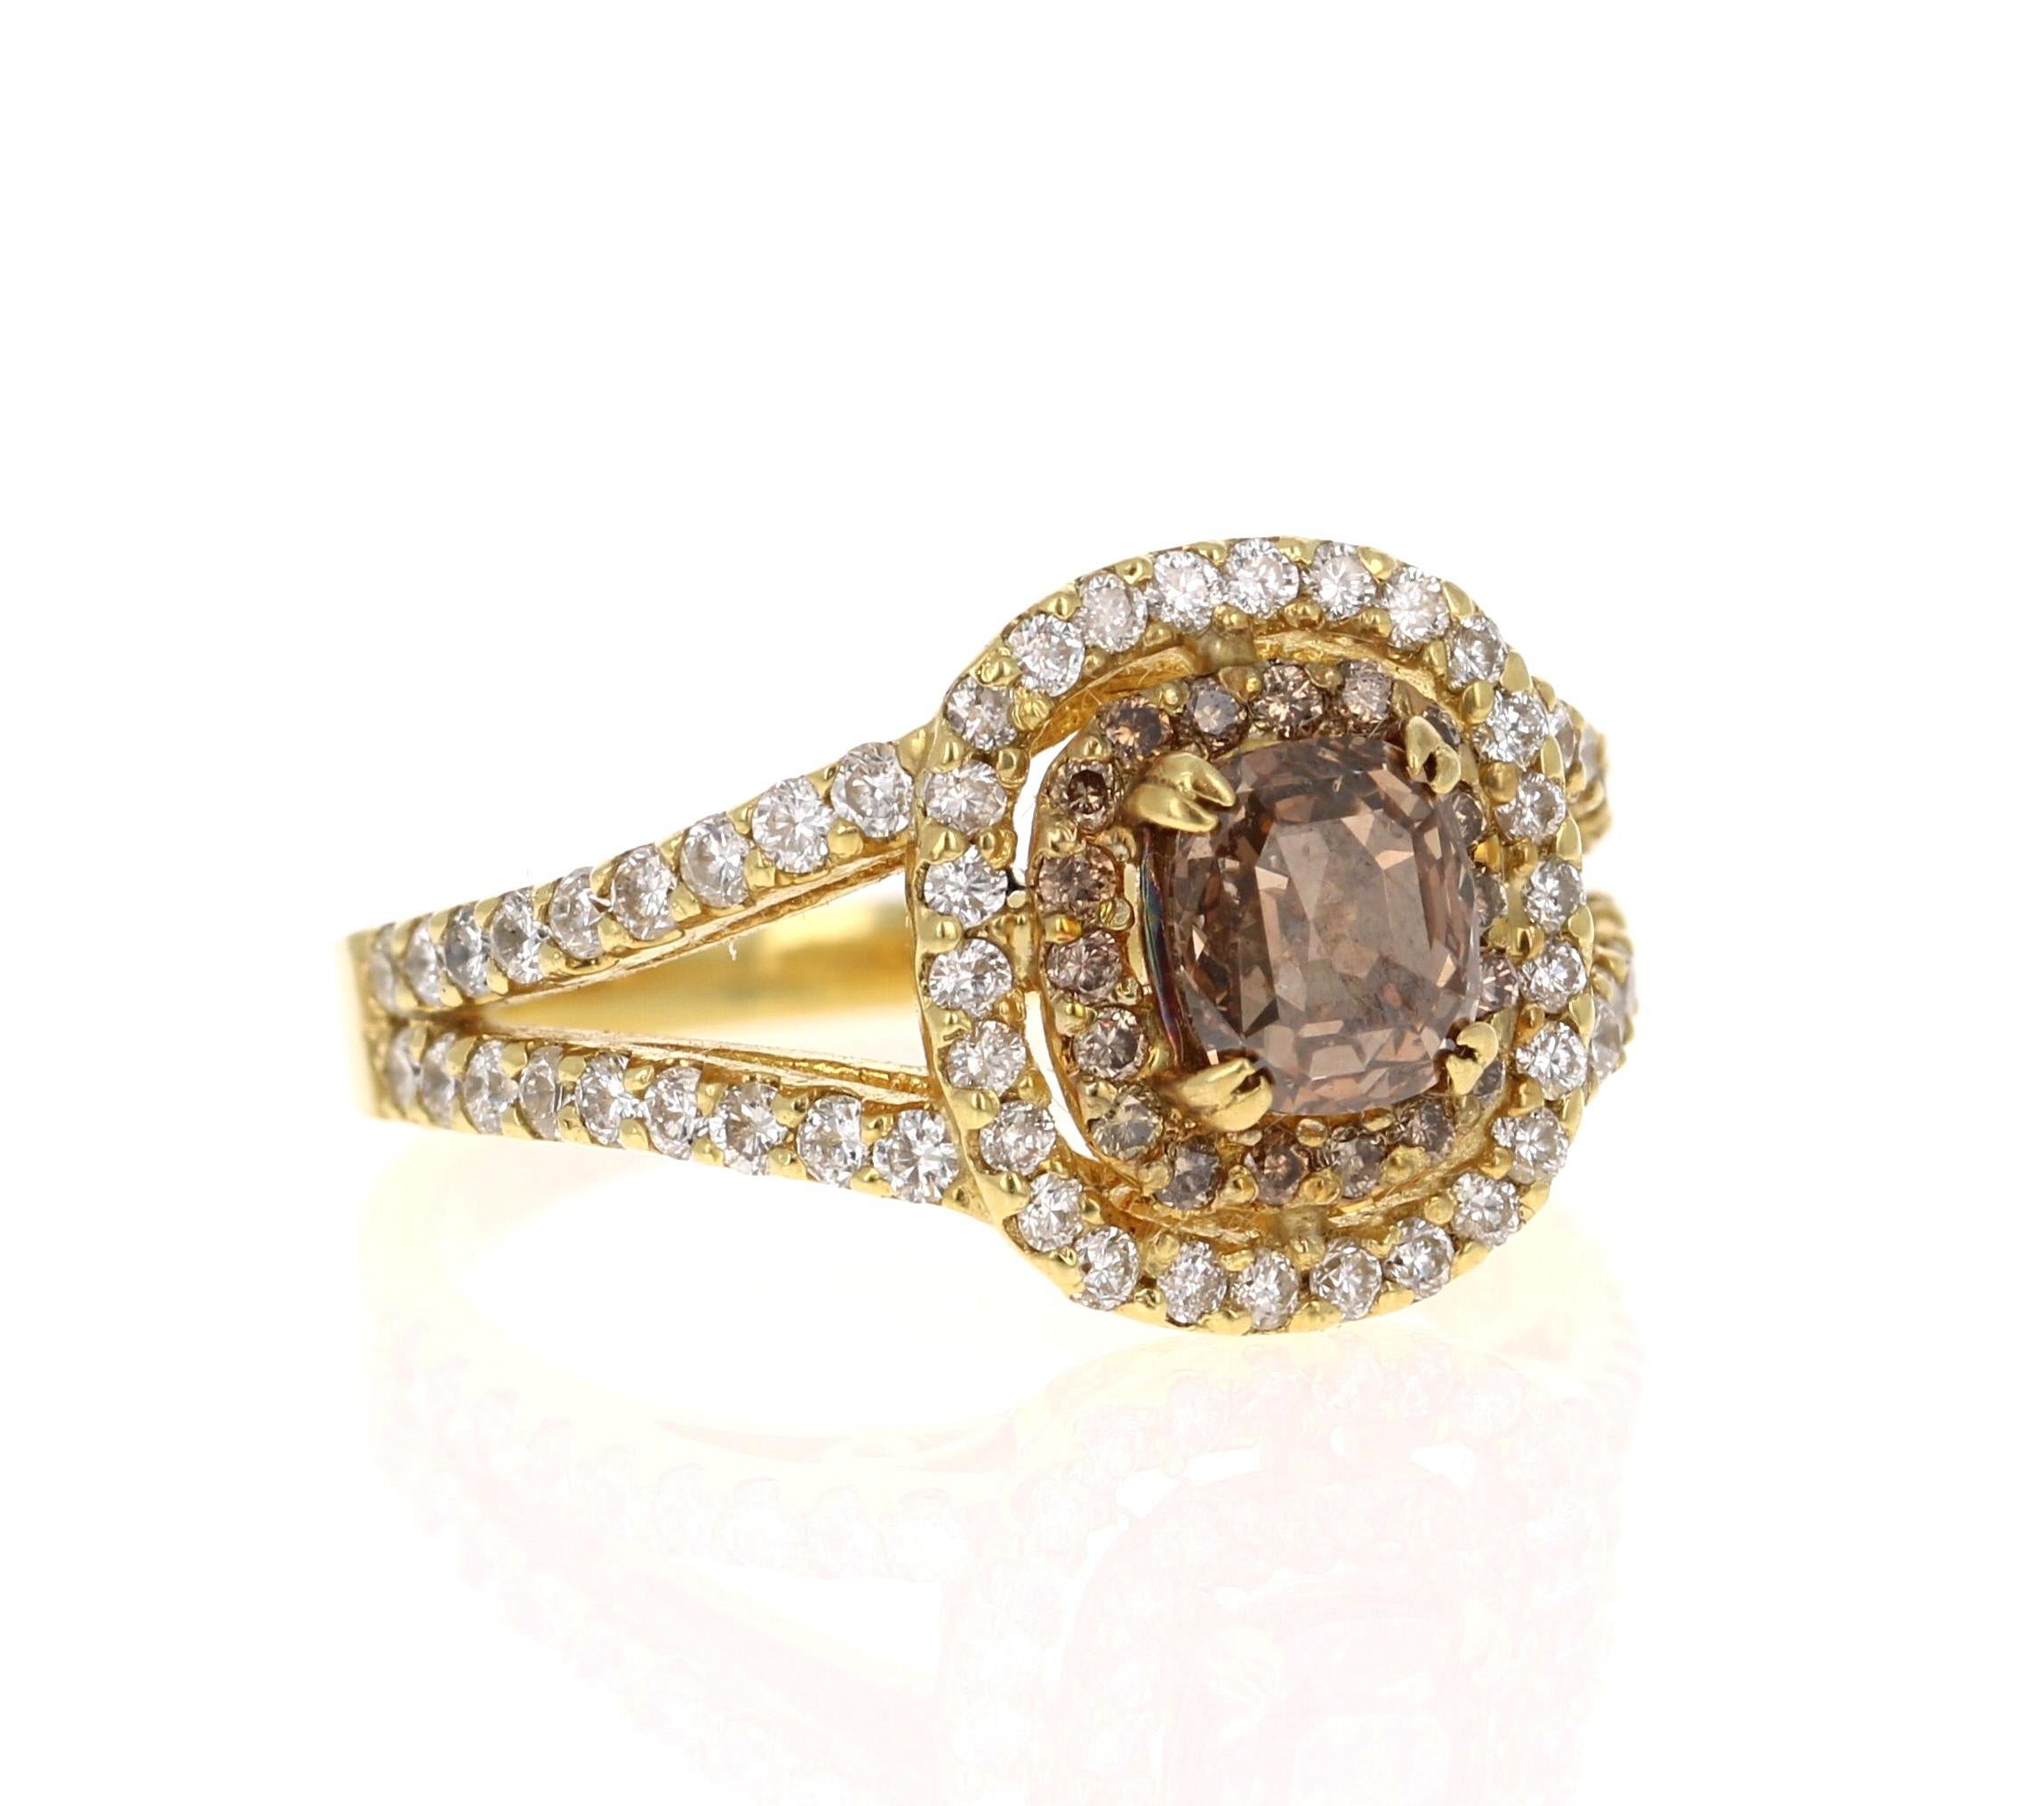 This beauty has a deep Brown/Champagne colored Natural Rectangular-Cushion Diamond that weighs 1.09 Carats (Clarity: VS2). It is surrounded by a row of 18 Natural Champagne Diamonds that weigh 0.15 Carats (Clarity: VS) and 62 Natural White Diamonds